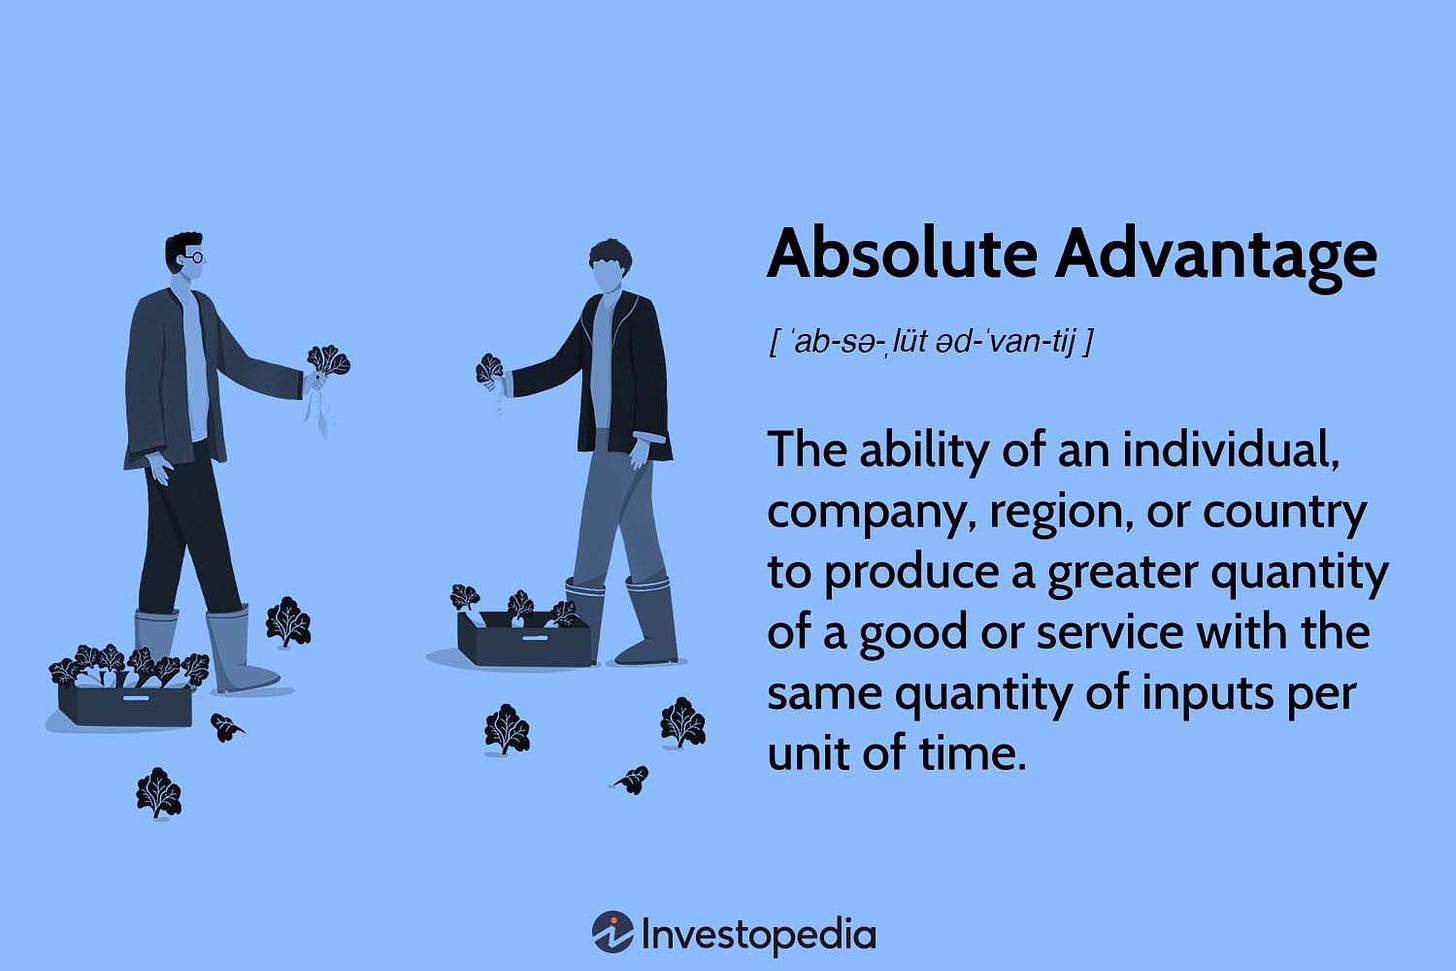 Absolute Advantage: Definition, Benefits, and Example